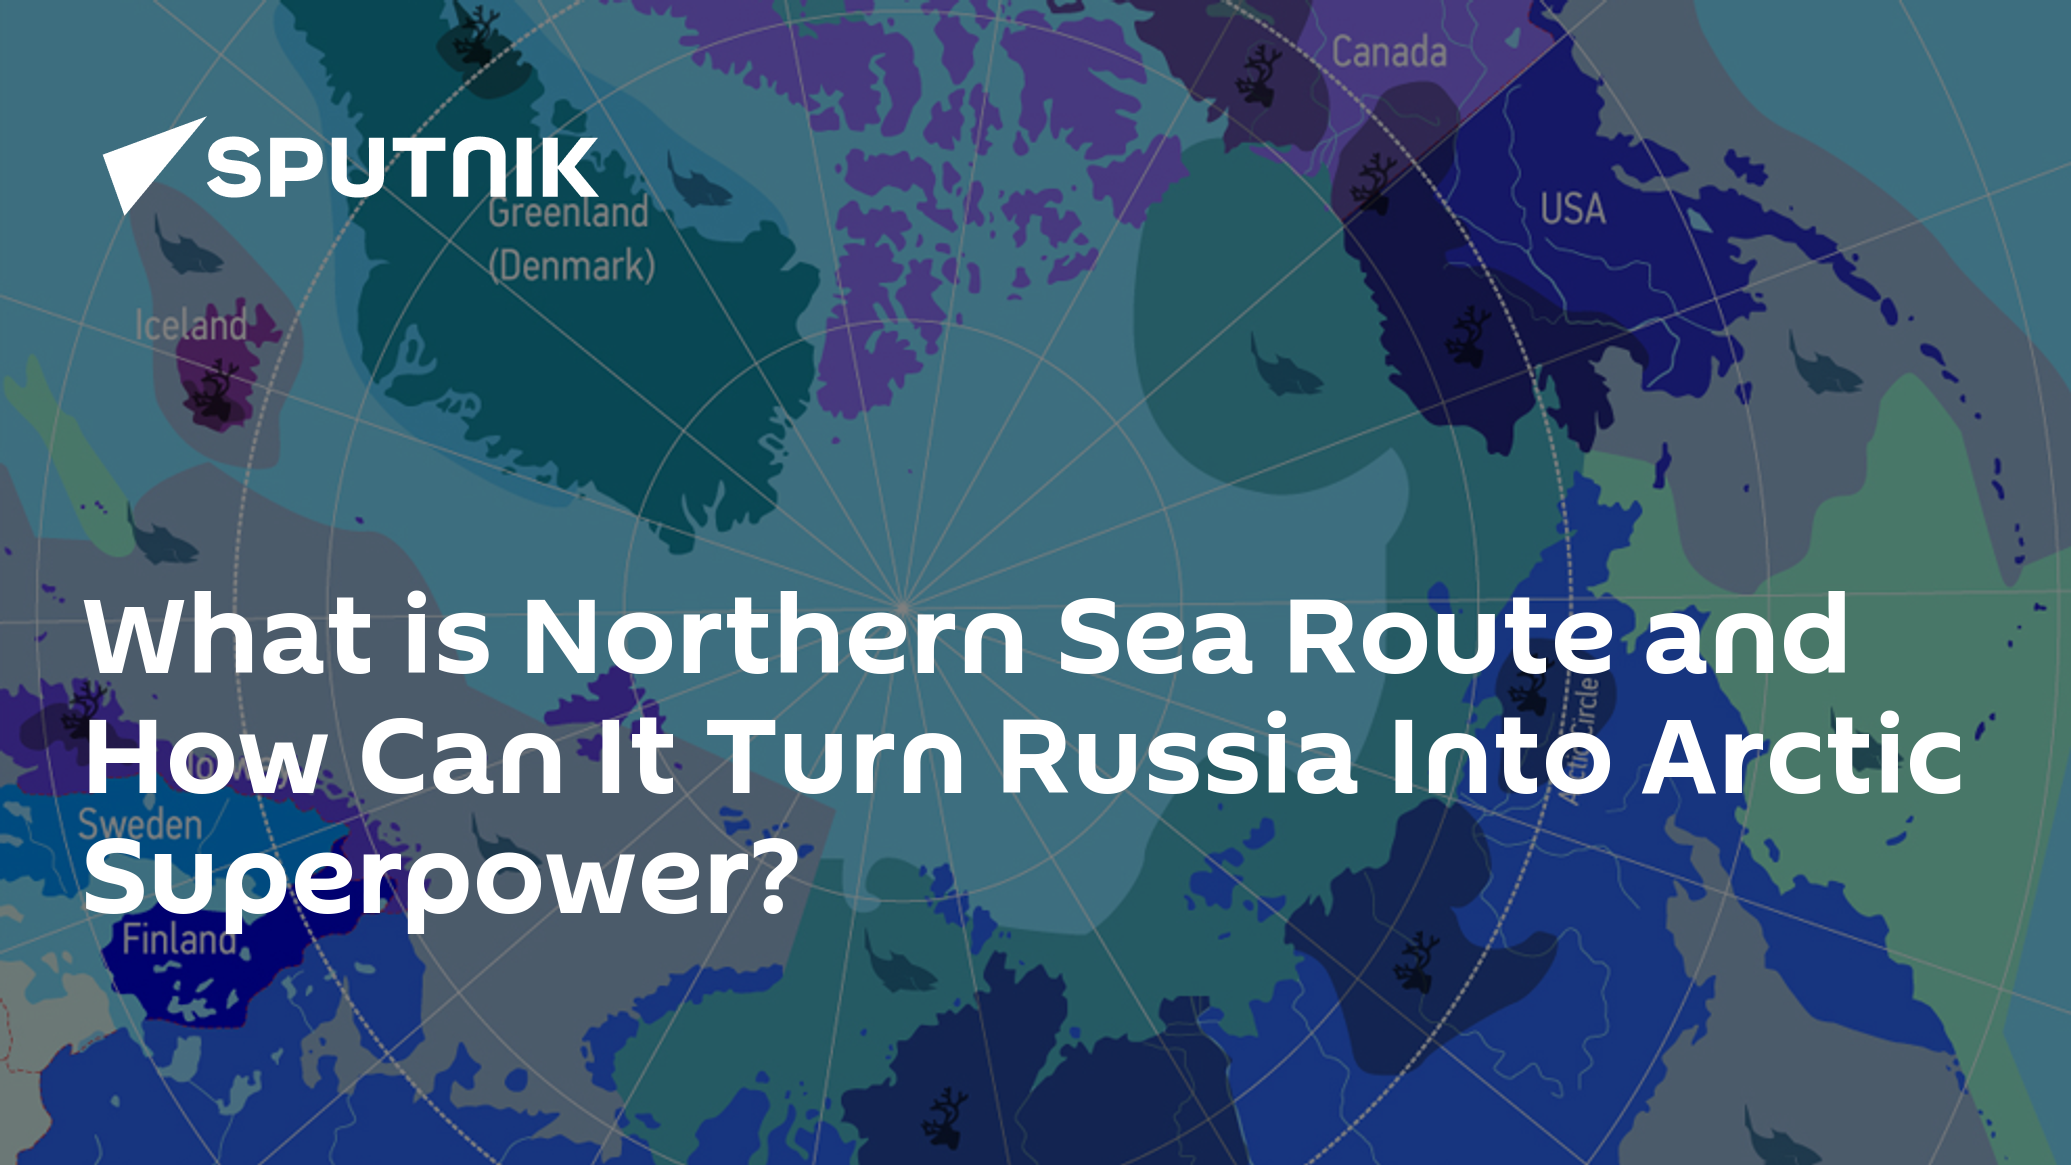 What is Northern Sea Route and How Can It Turn Russia Into Arctic Superpower?